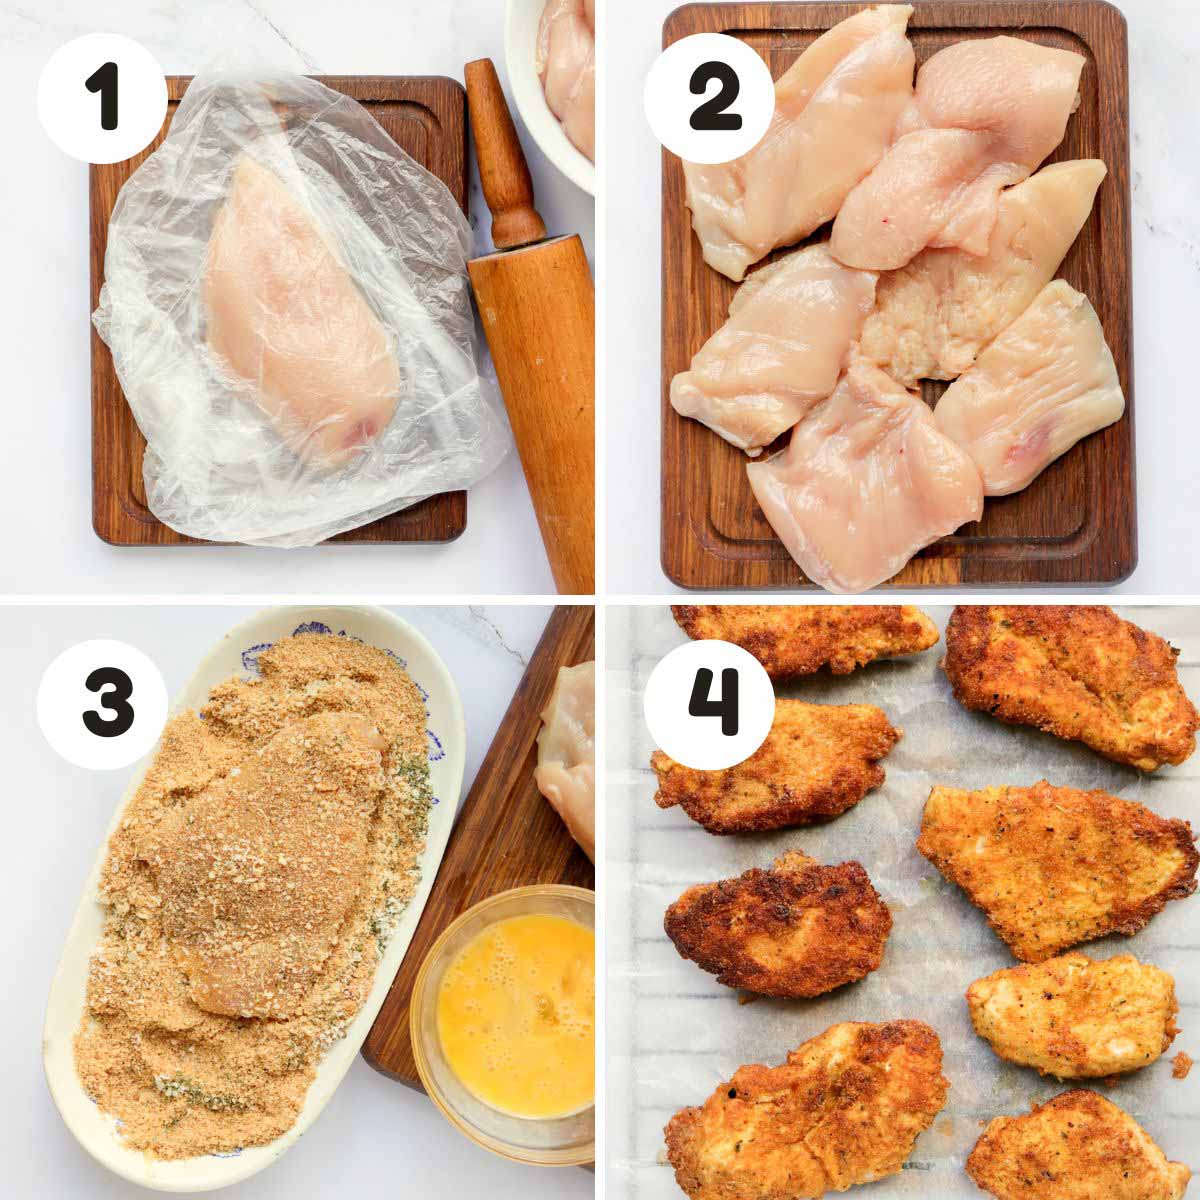 Steps to make the chicken parmesan.